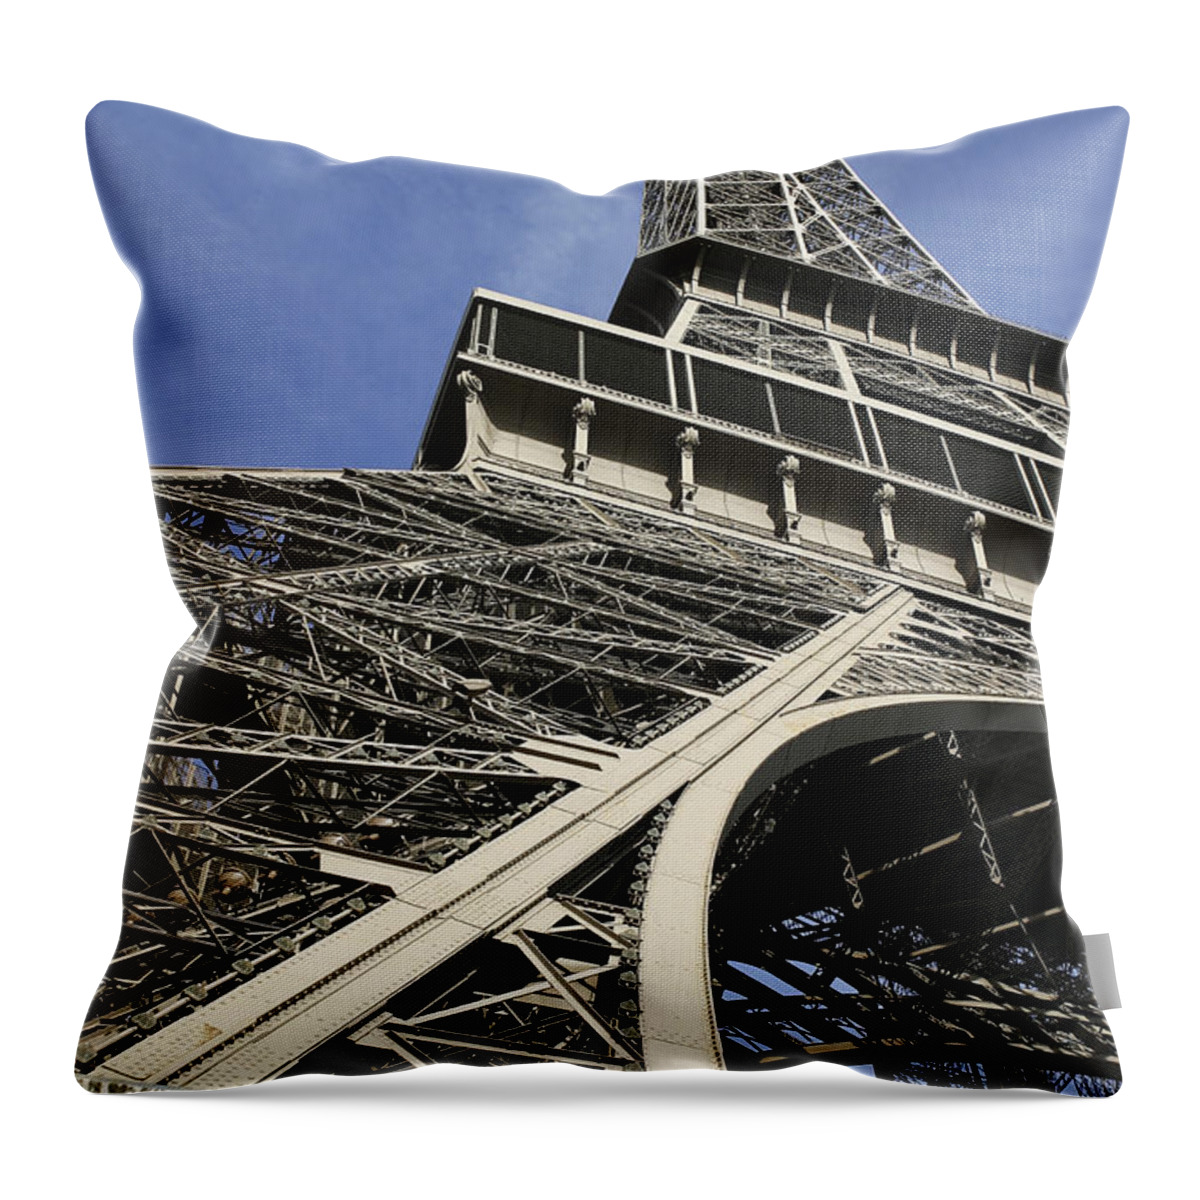 Eiffel Tower Throw Pillow featuring the photograph Eiffel Tower by Belinda Greb